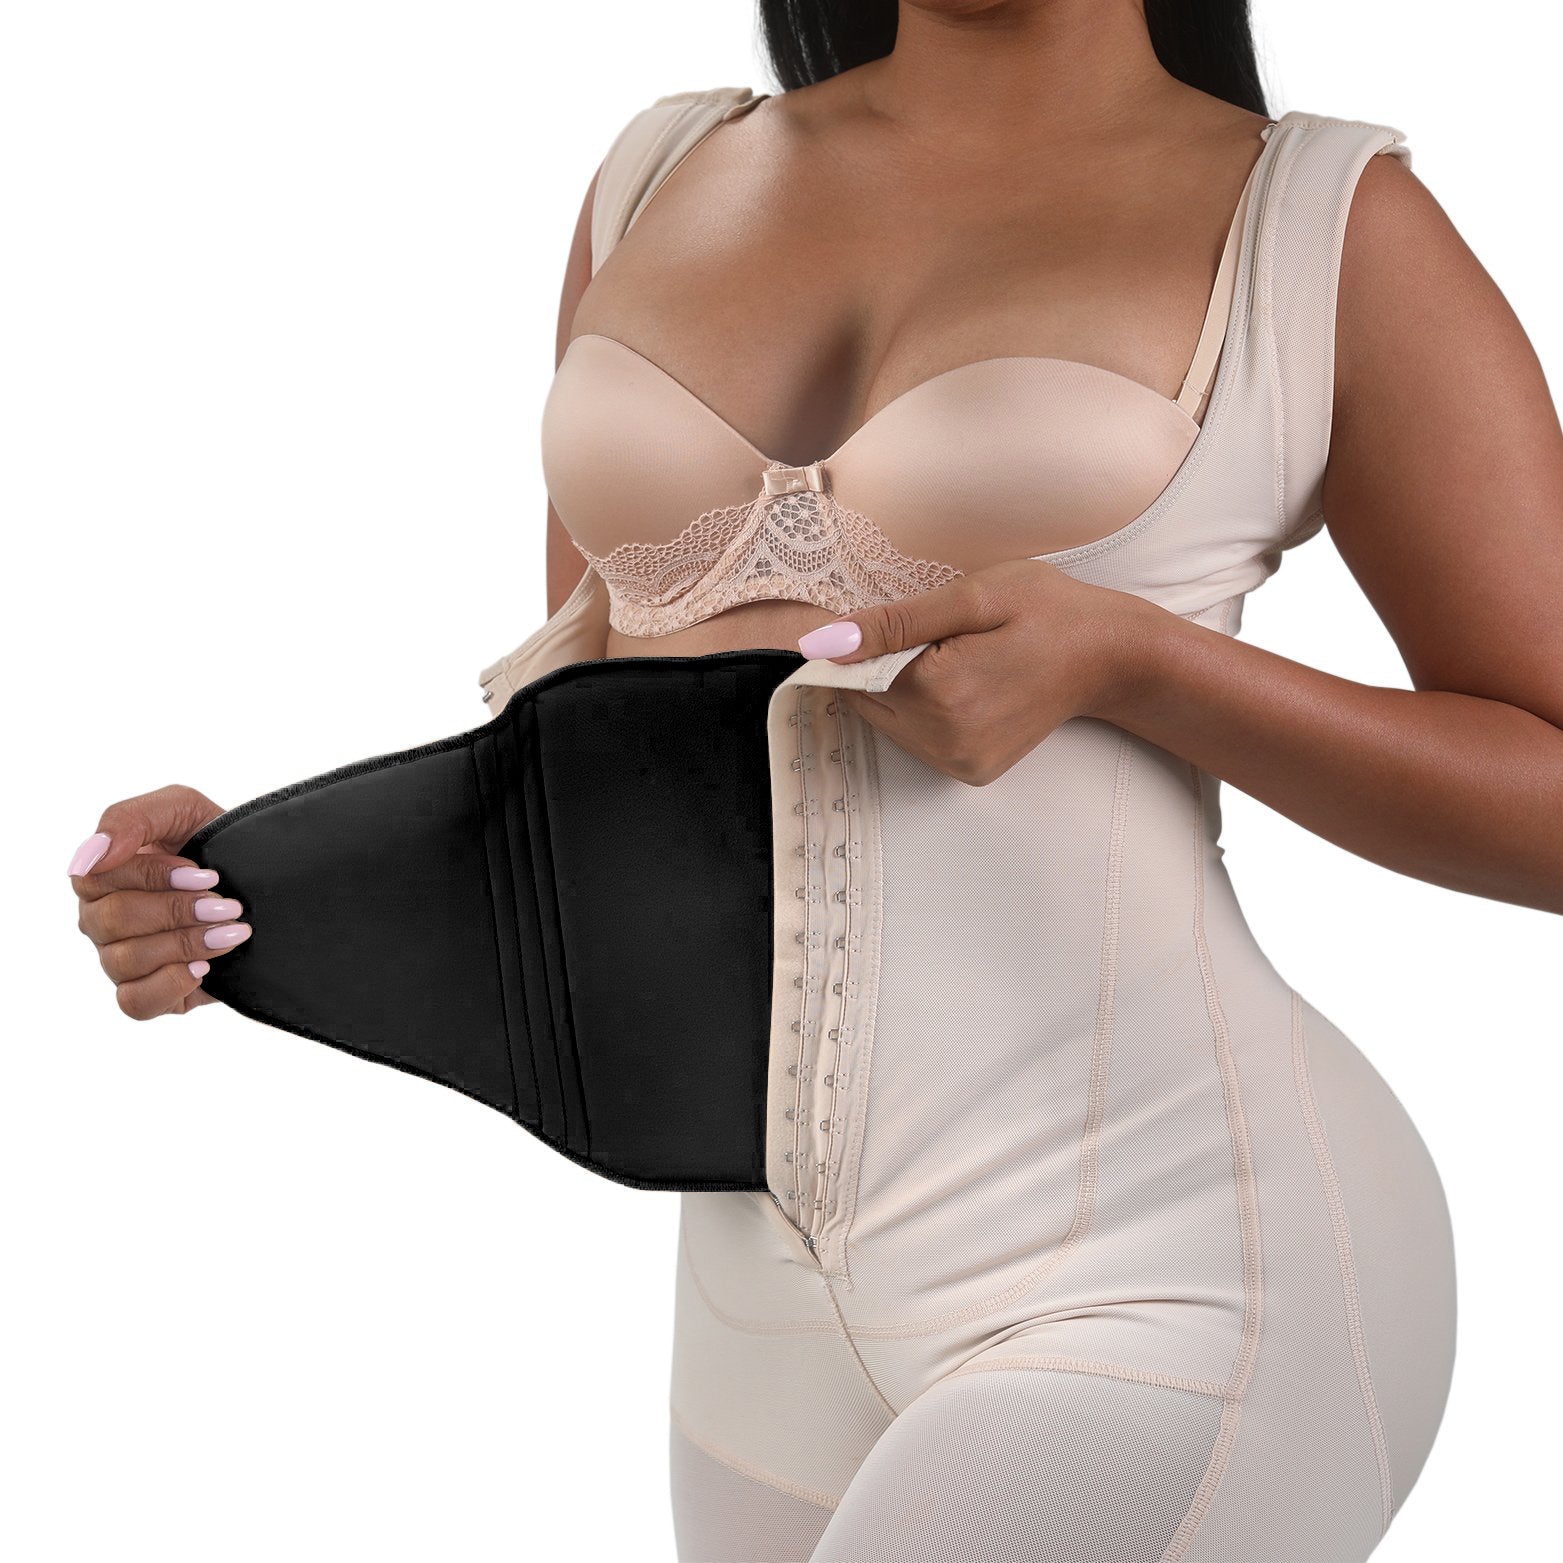 Snatched-Body - Wear a compression garment or compression foam as  instructed by your surgeon. The compression garment will help with the  swelling . . . . . . . . #snatched #snatchedbody #